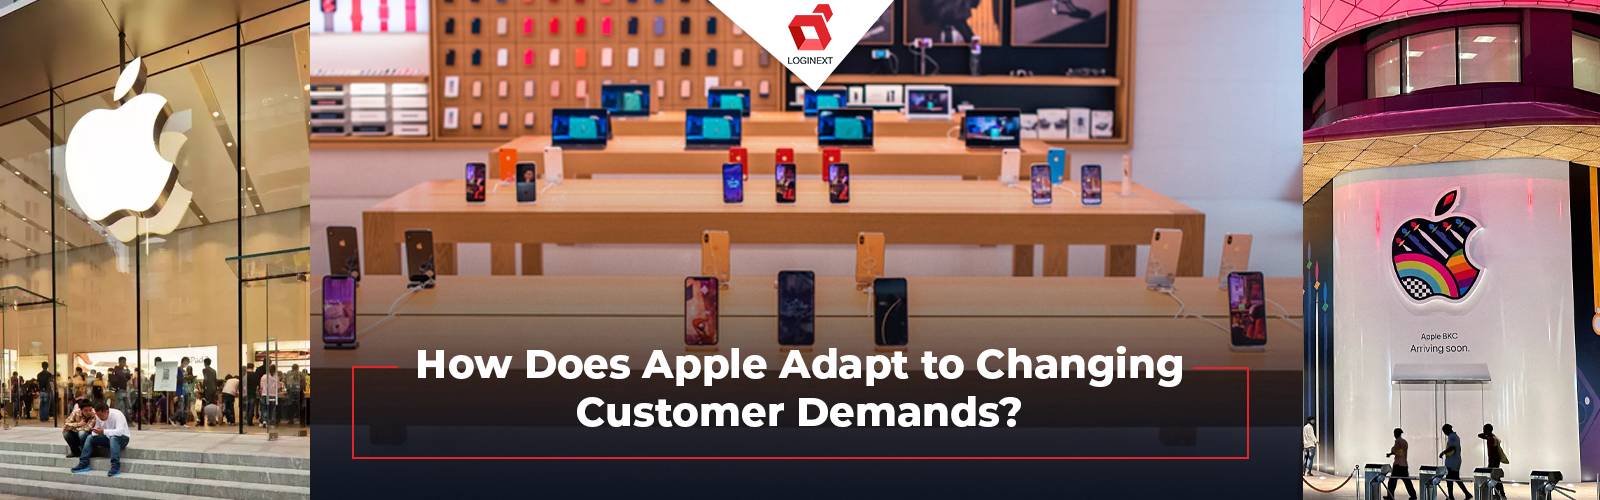 Logistics management software that transformed Apple's Supply Chain